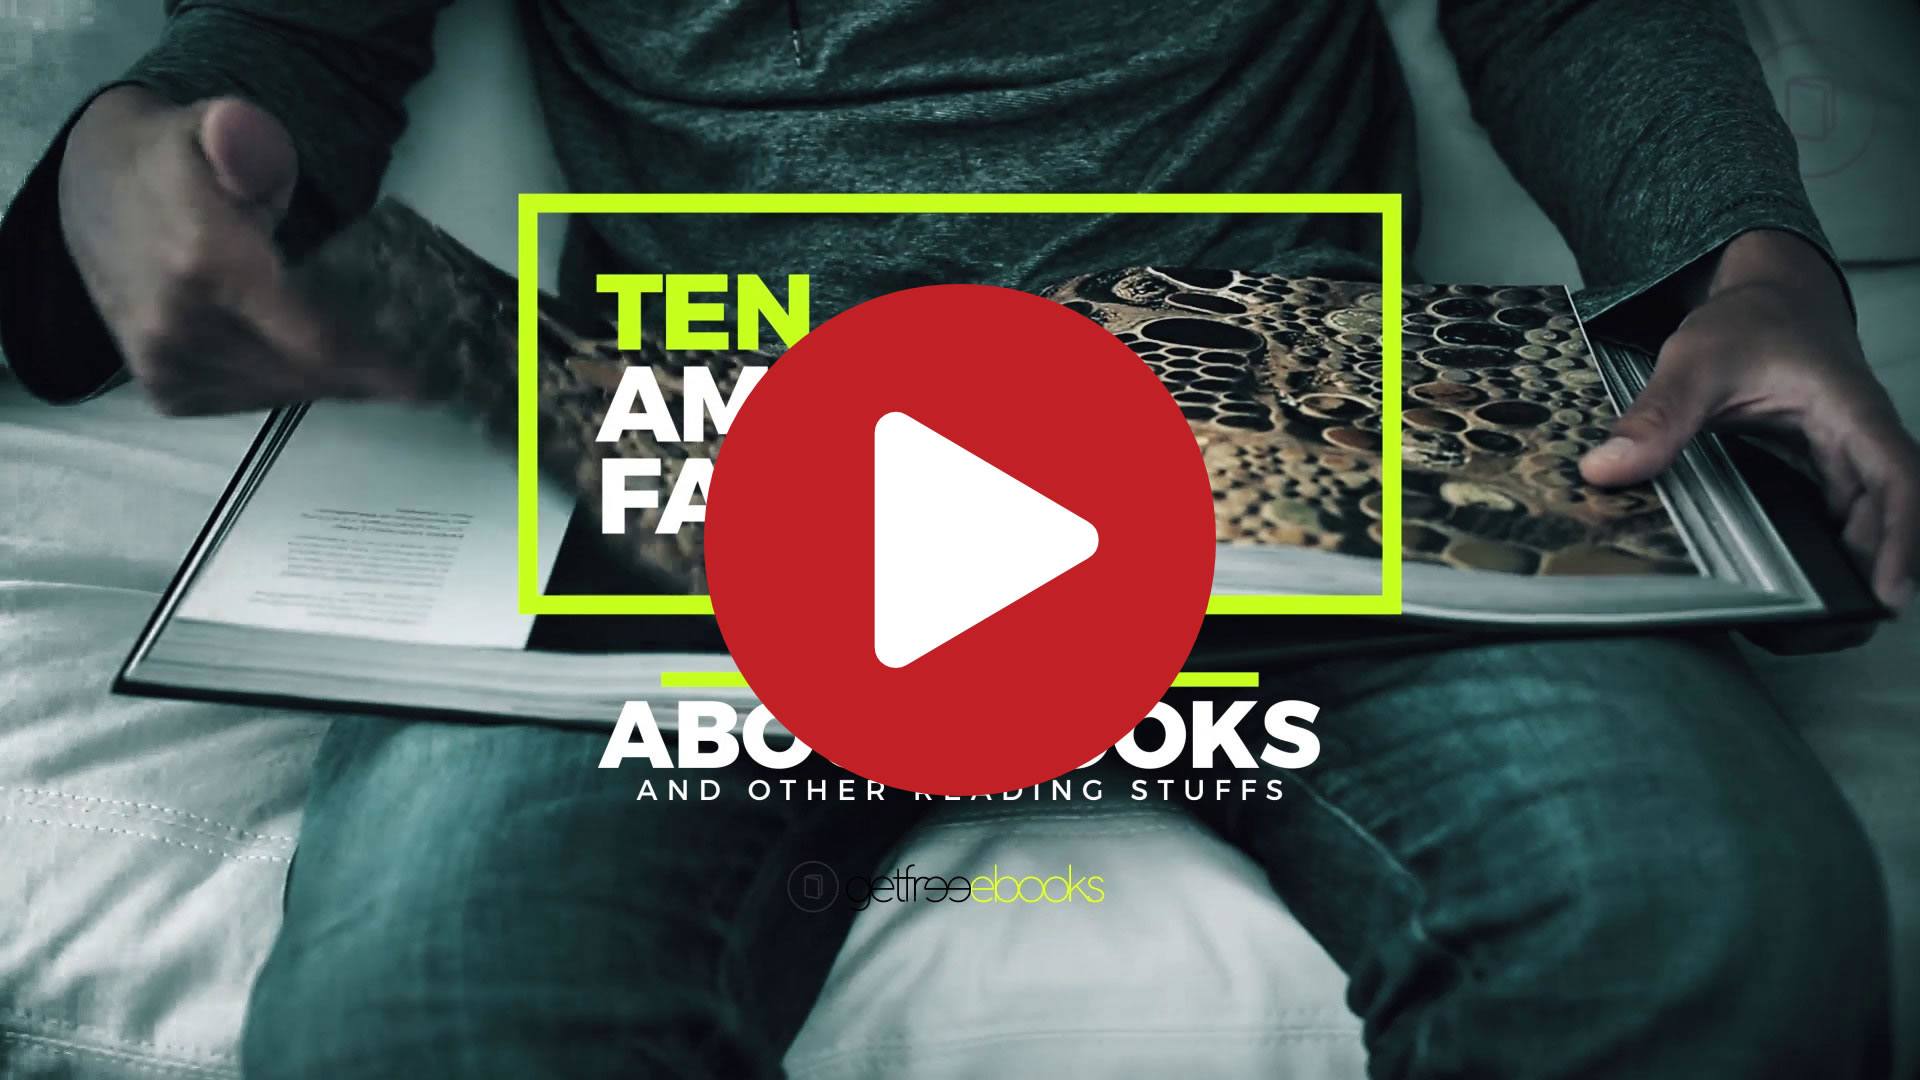 10 Amazing Facts About Books - Part 1